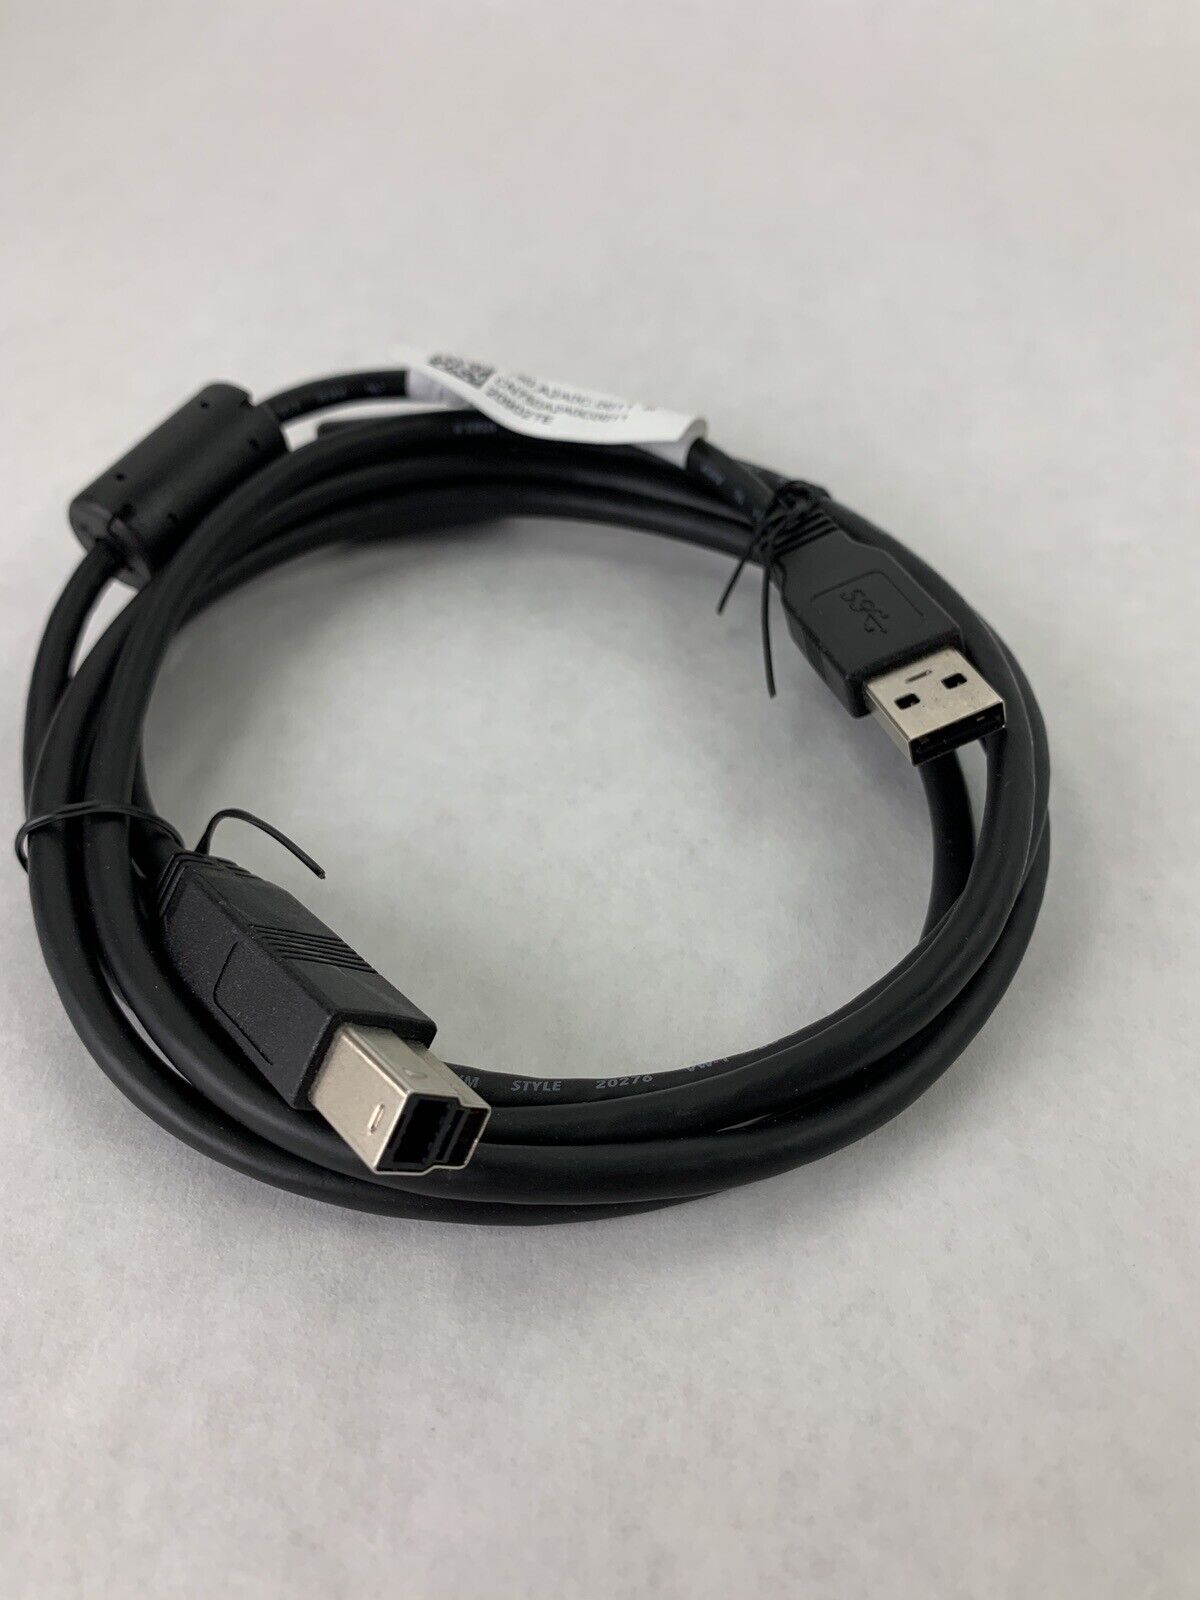 Pair of HP 935544 6ft USB 3.0 Cable USB Type-A Type-B 935544-0012209